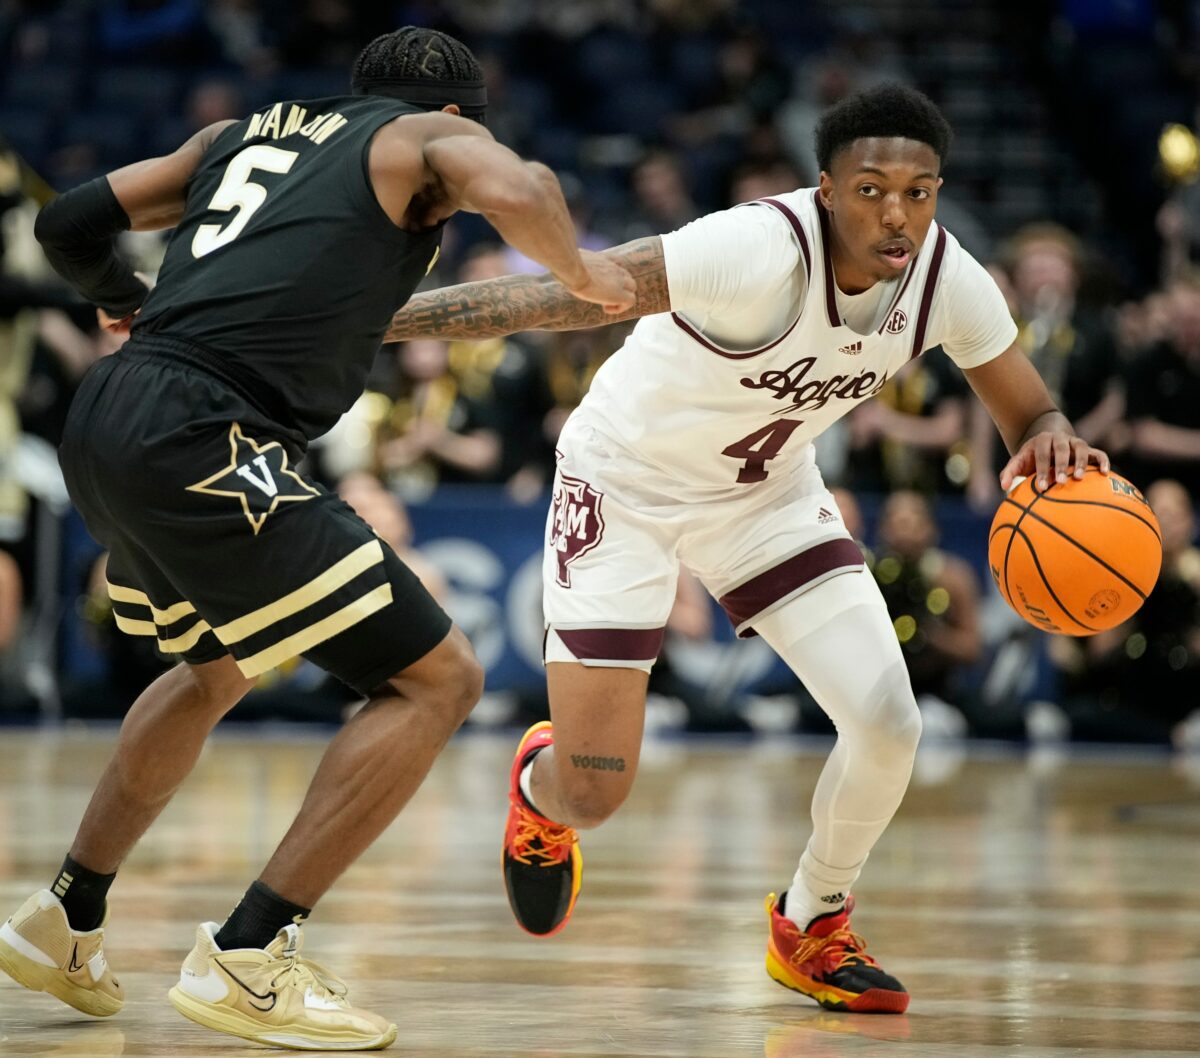 SEC Post Game Press Conference: Buzz Williams, Wade Taylor IV, Julius Marble